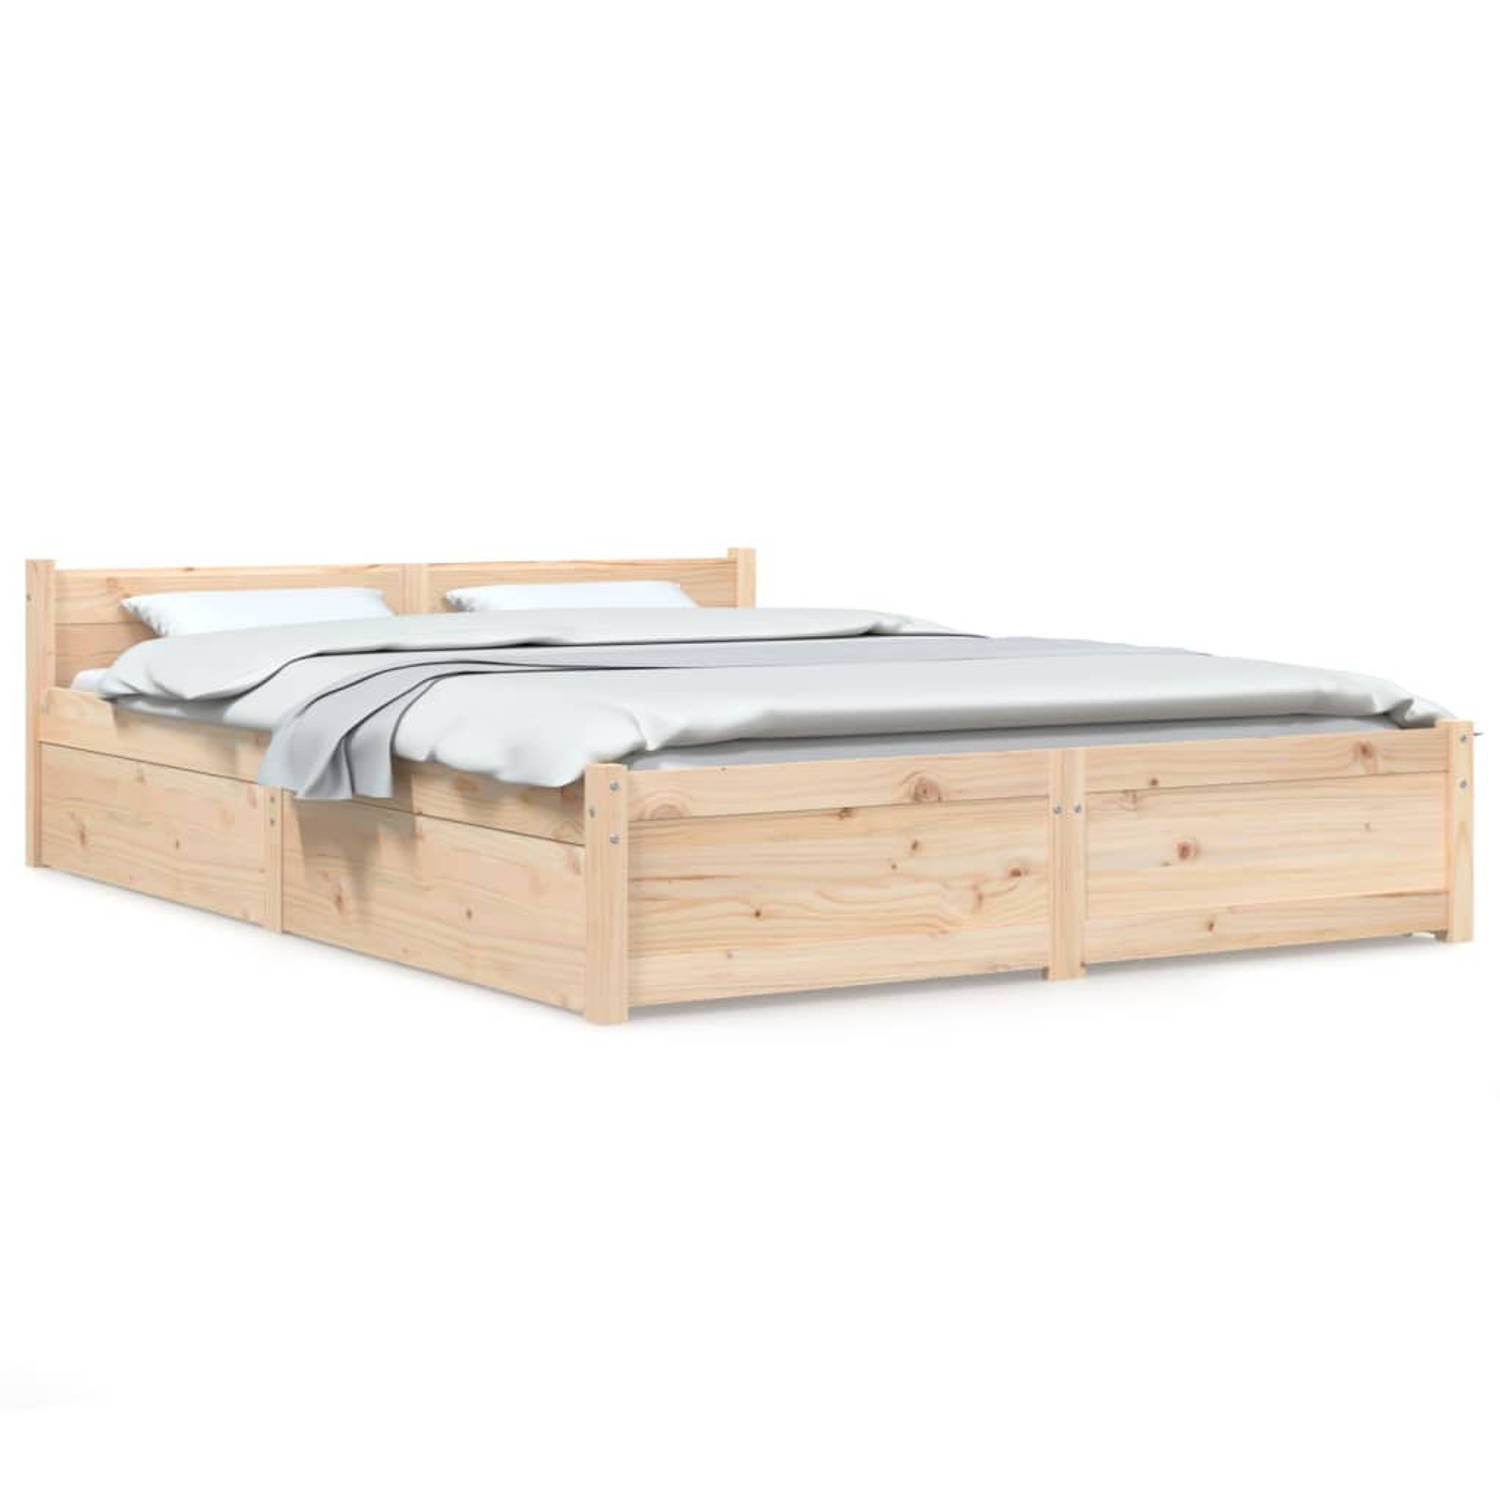 The Living Store Bed Grenenhout - Opbergfunctie - Massief hout - 140 x 190 cm